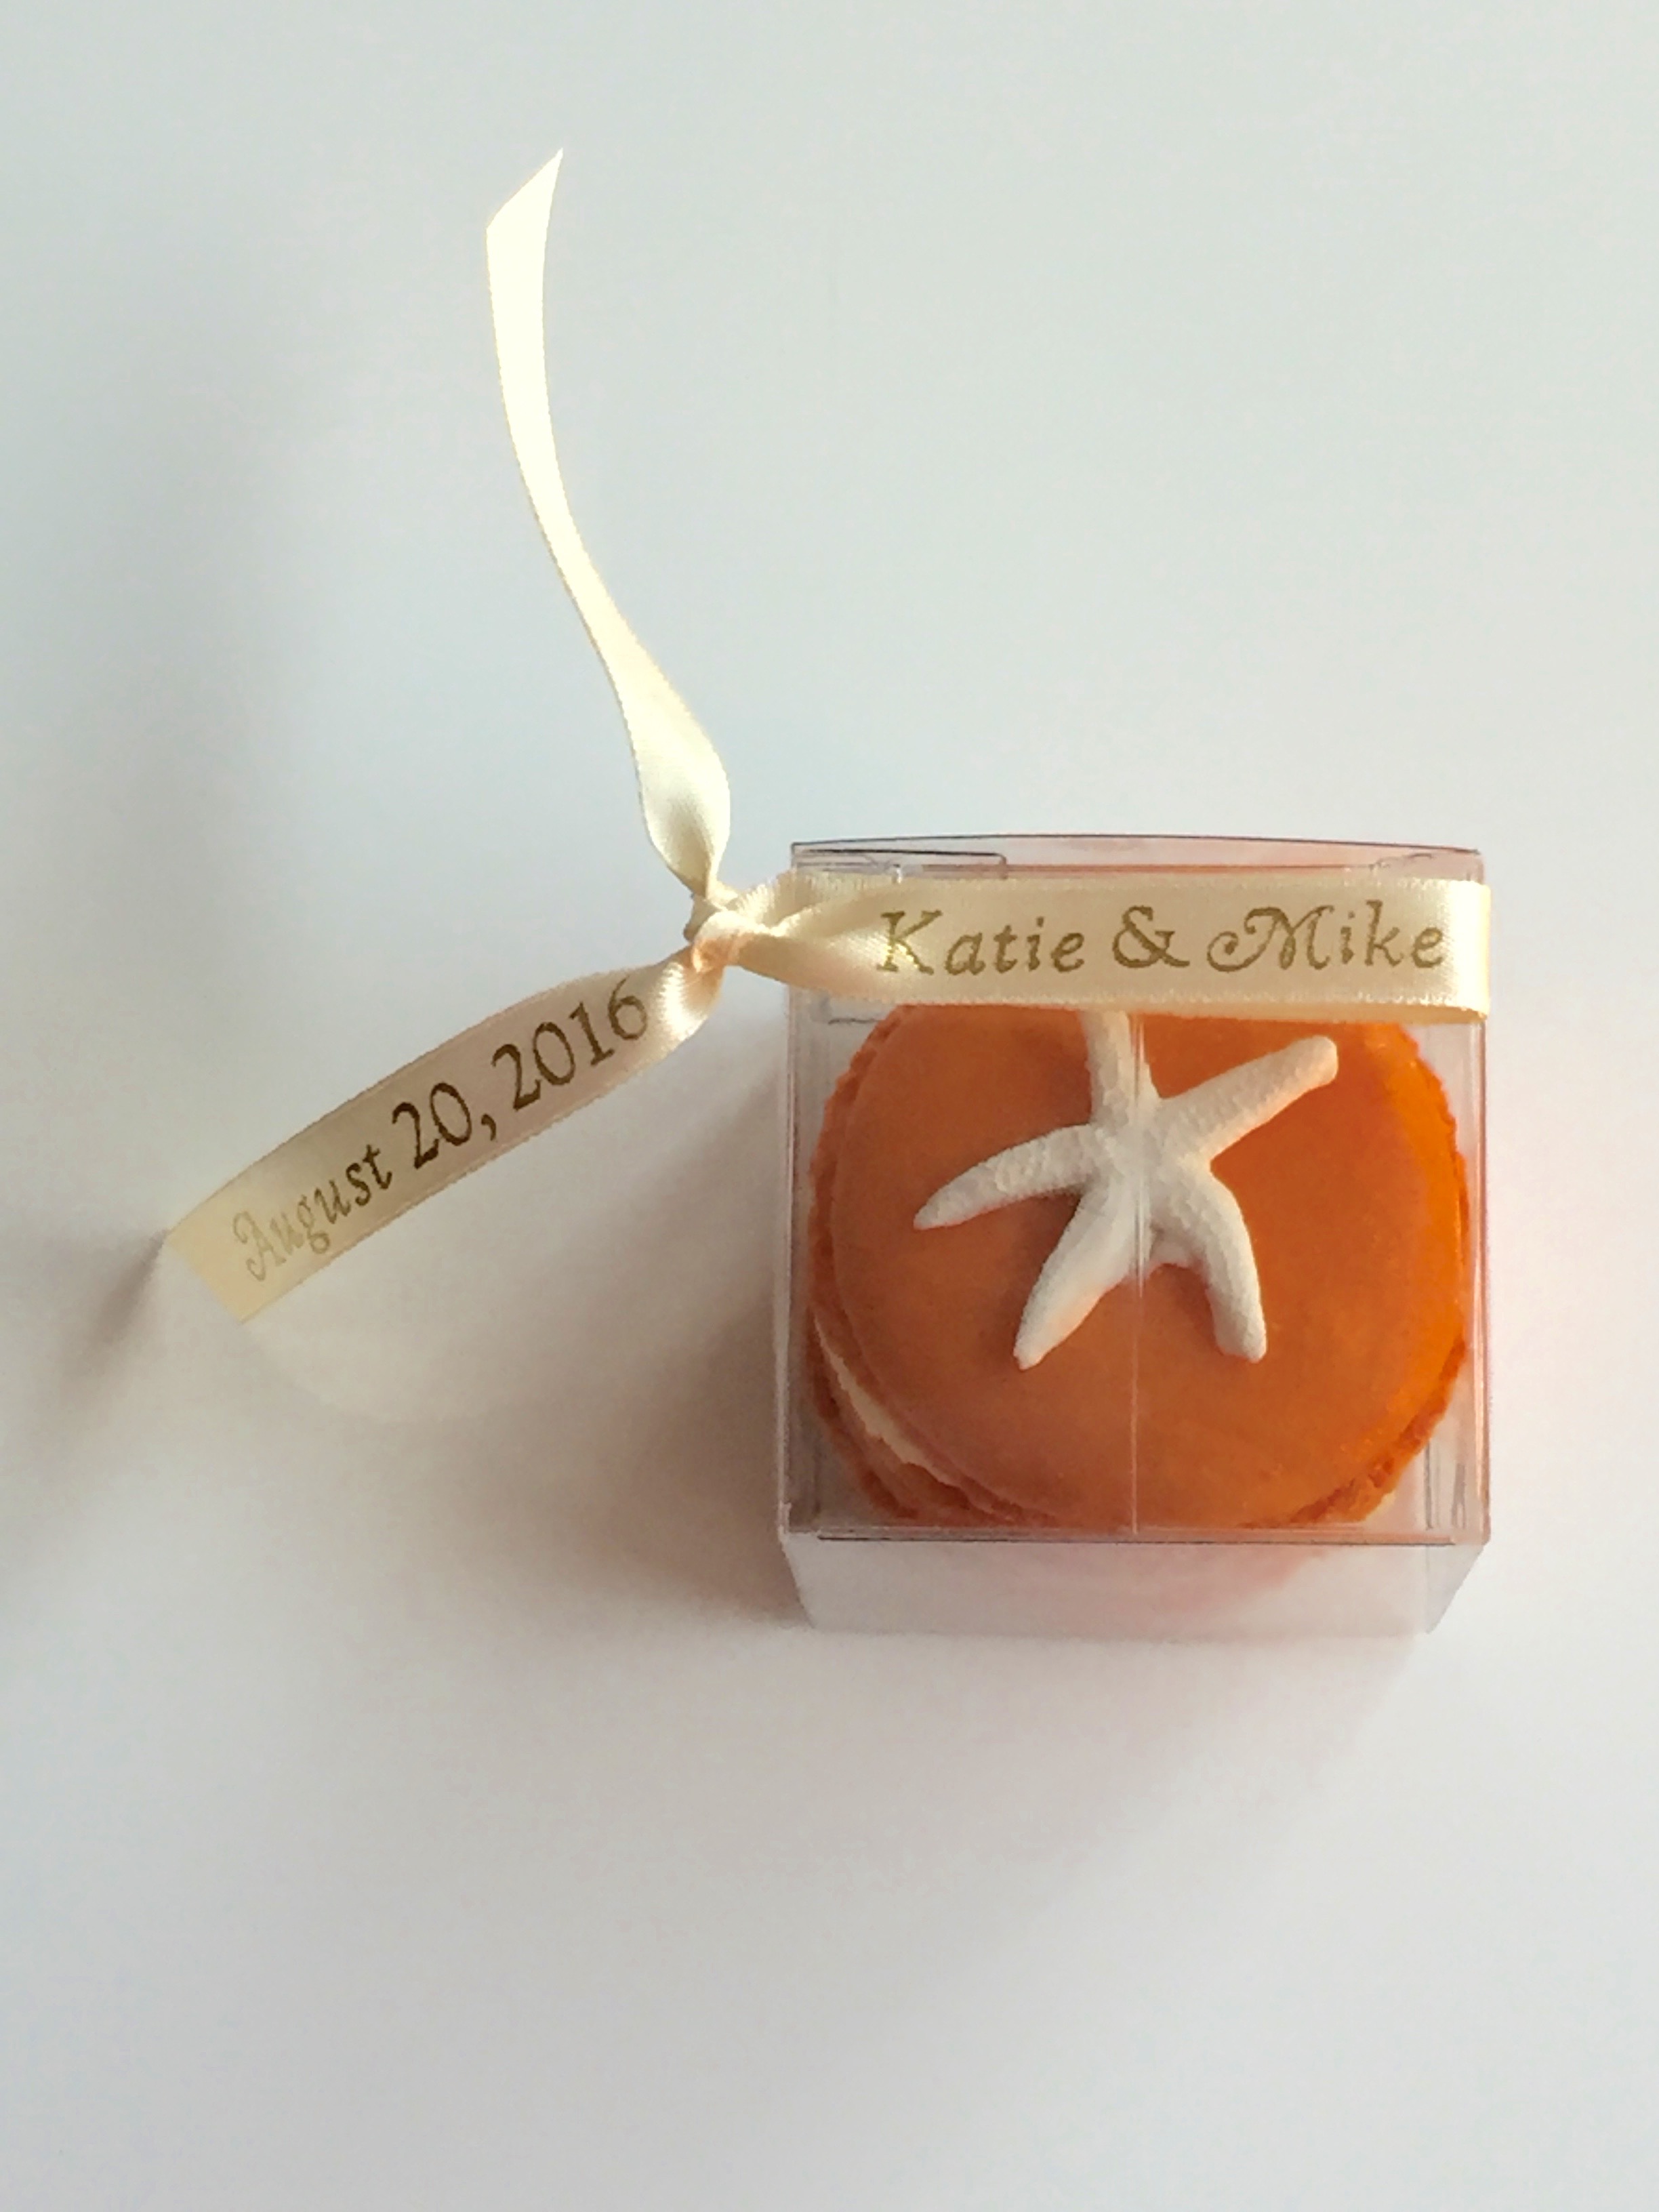 Personalized favors in your choice of ribbon color and metallic font color (gold, rose gold, silver). As shown $7. 